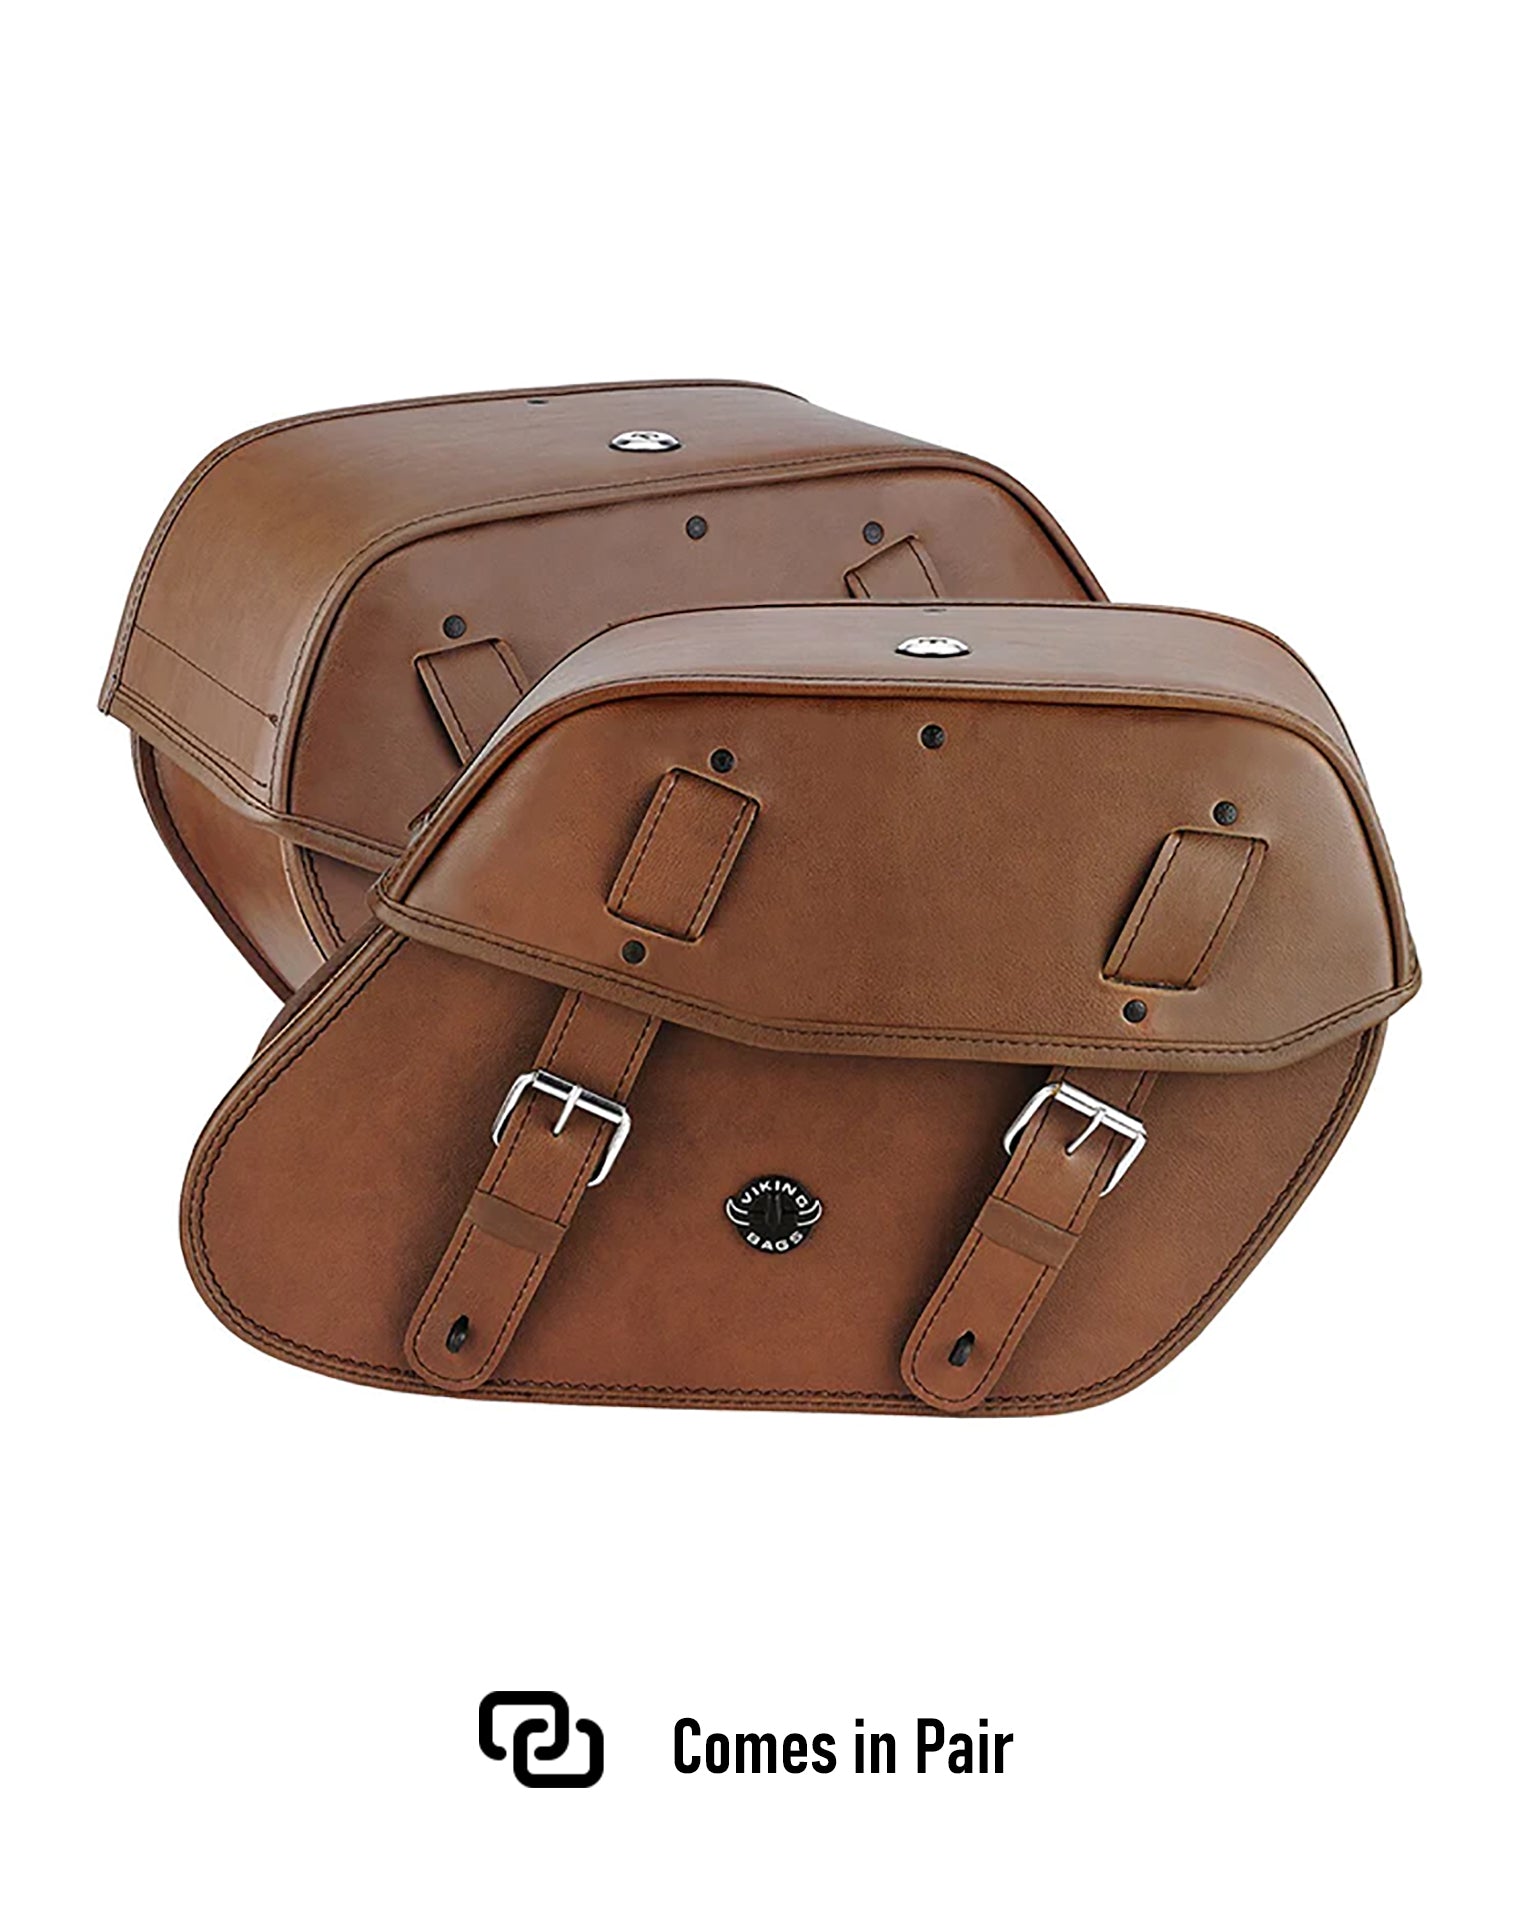 Viking Odin Brown Large Leather Motorcycle Saddlebags For Harley Softail Low Rider St Fxlrst Weather Resistant Bags Comes in Pair